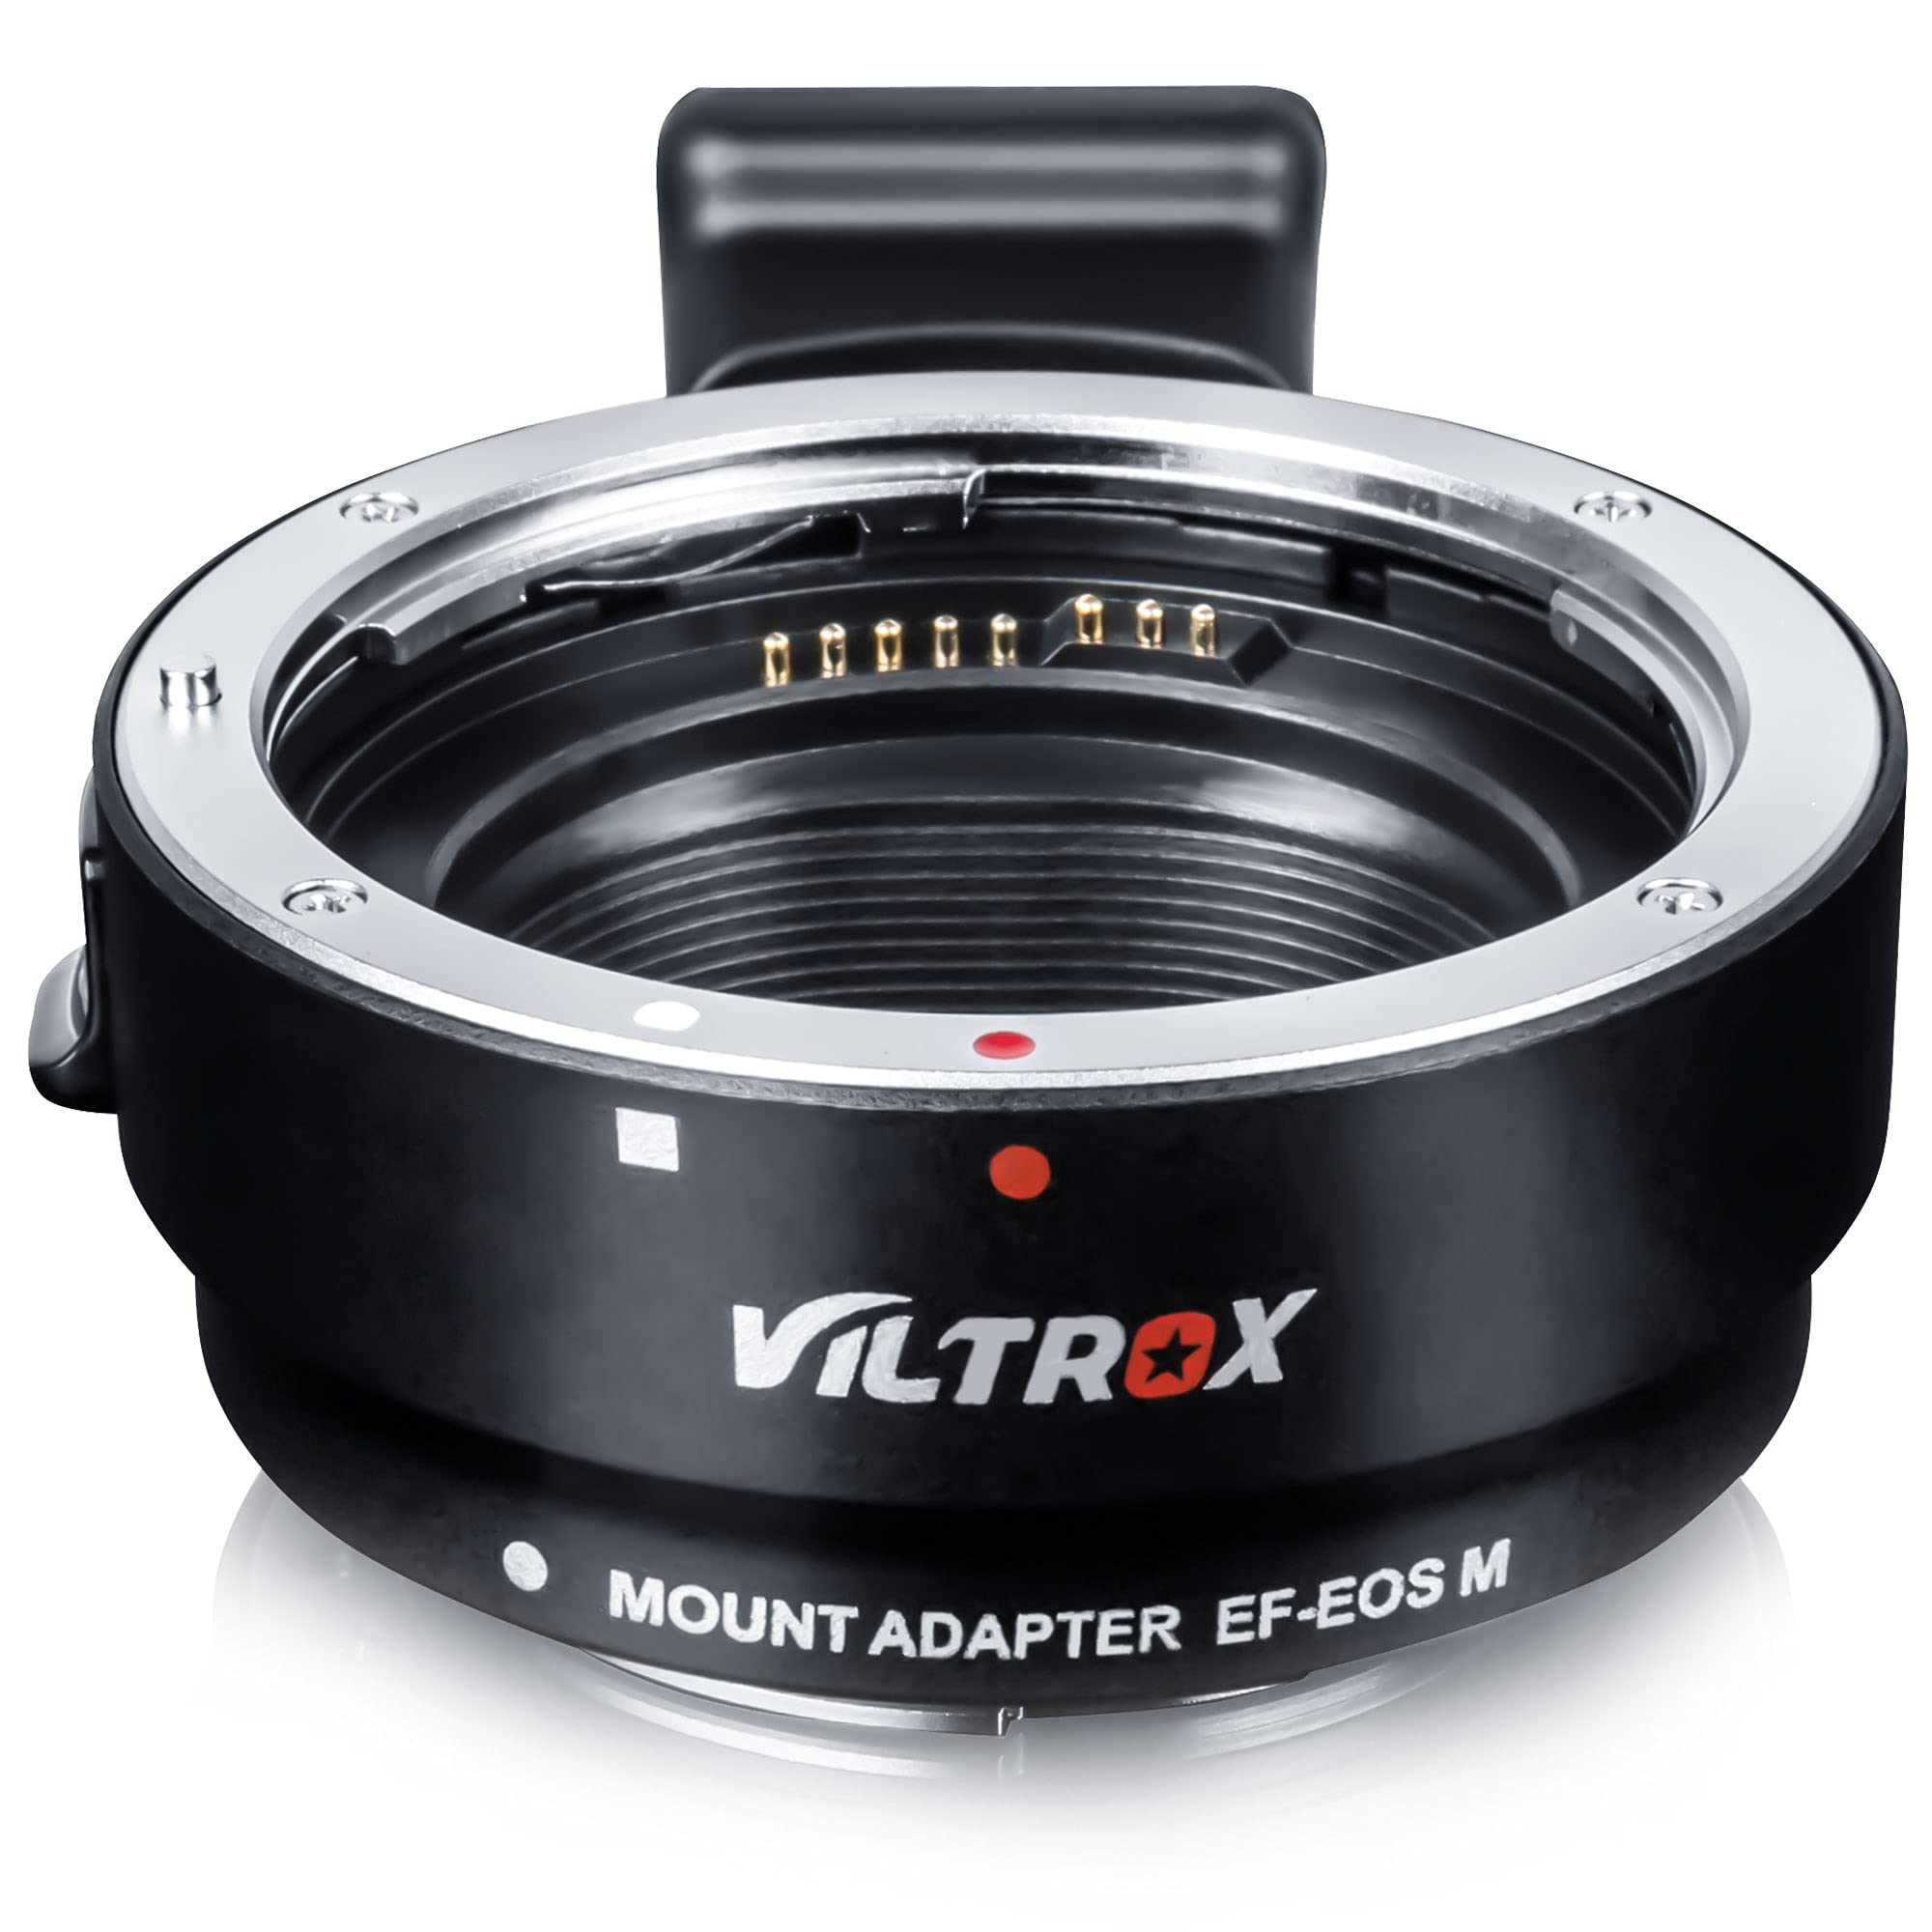 VILTROX M Lens Mount Auto Focus Adapter, Compatible with Canon EF/EF-S Lens to Canon M (EF-M Mount) Mirrorless Camera Body EOS M100 M50 M3 M10 M6 M5 EF/EF-S to EOS